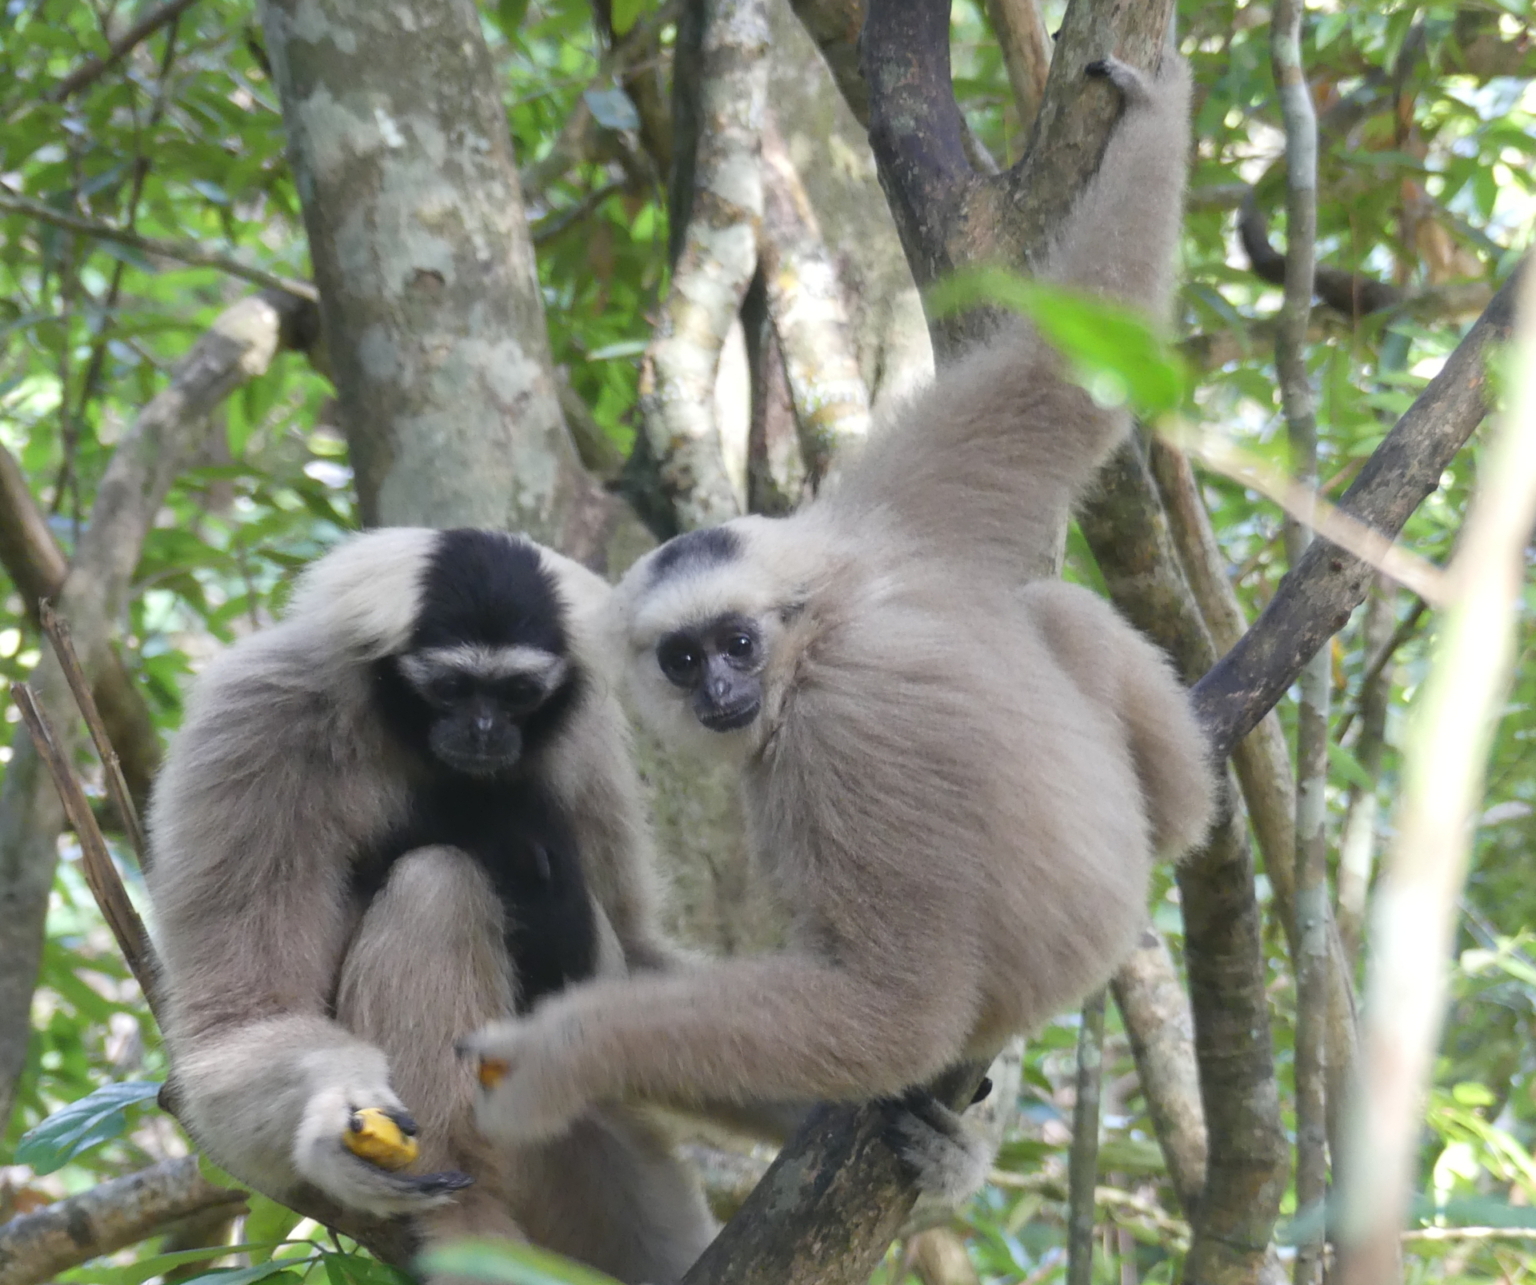 Primate Pileated Gibbon pair Angkor Wat landscape release program Wildlife Alliance Apsara Authority Forestry Administration Cambodia